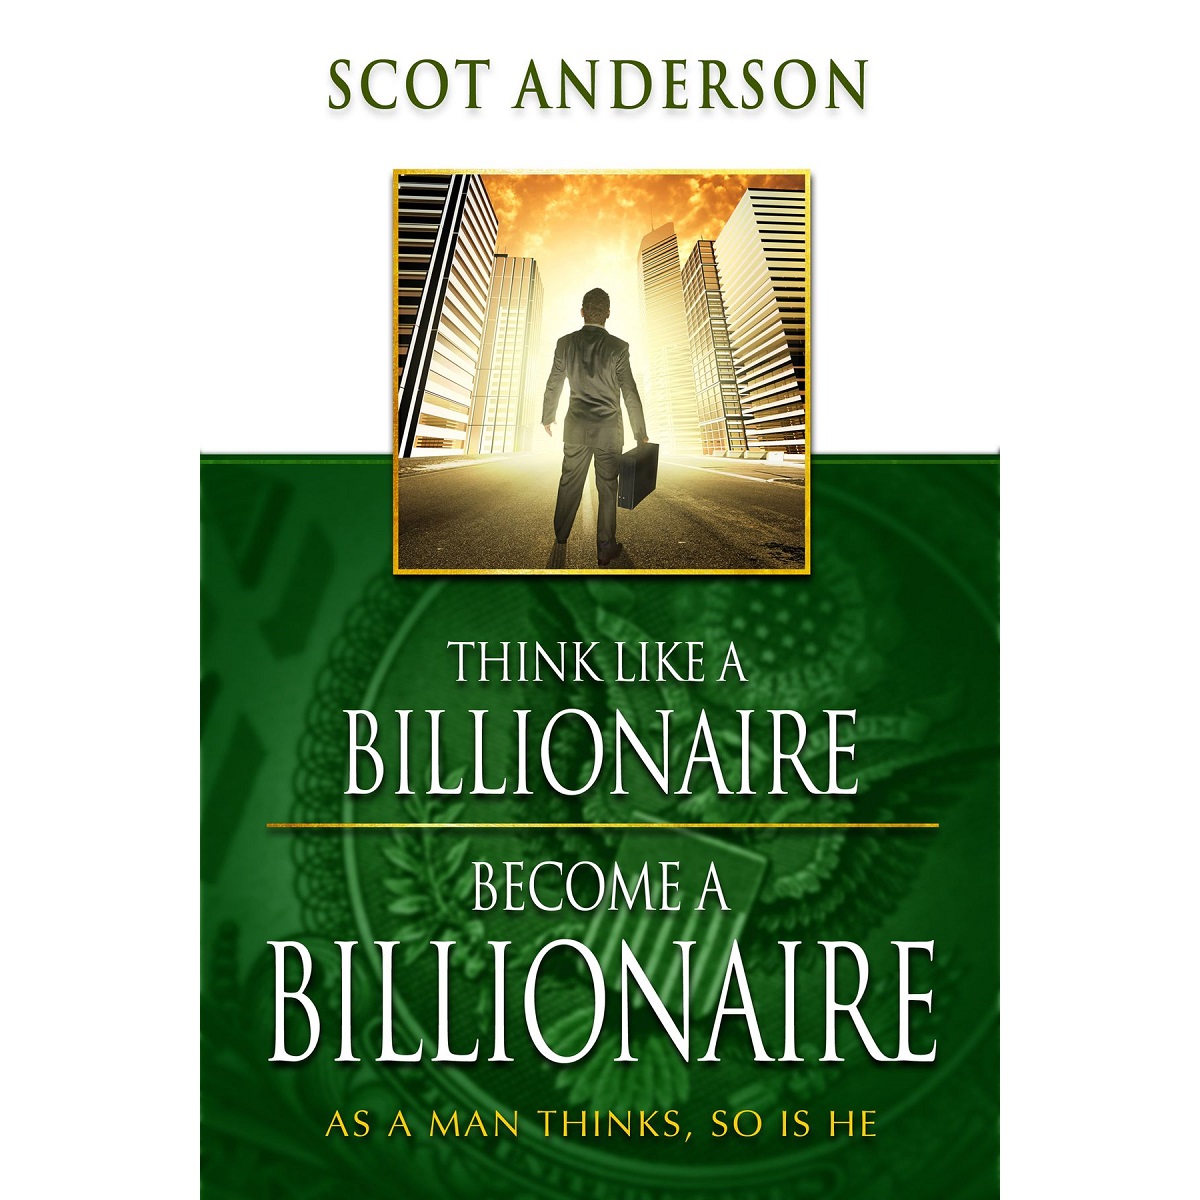 Think Like a Billionaire, Become a Billionaire by Scot Anderson